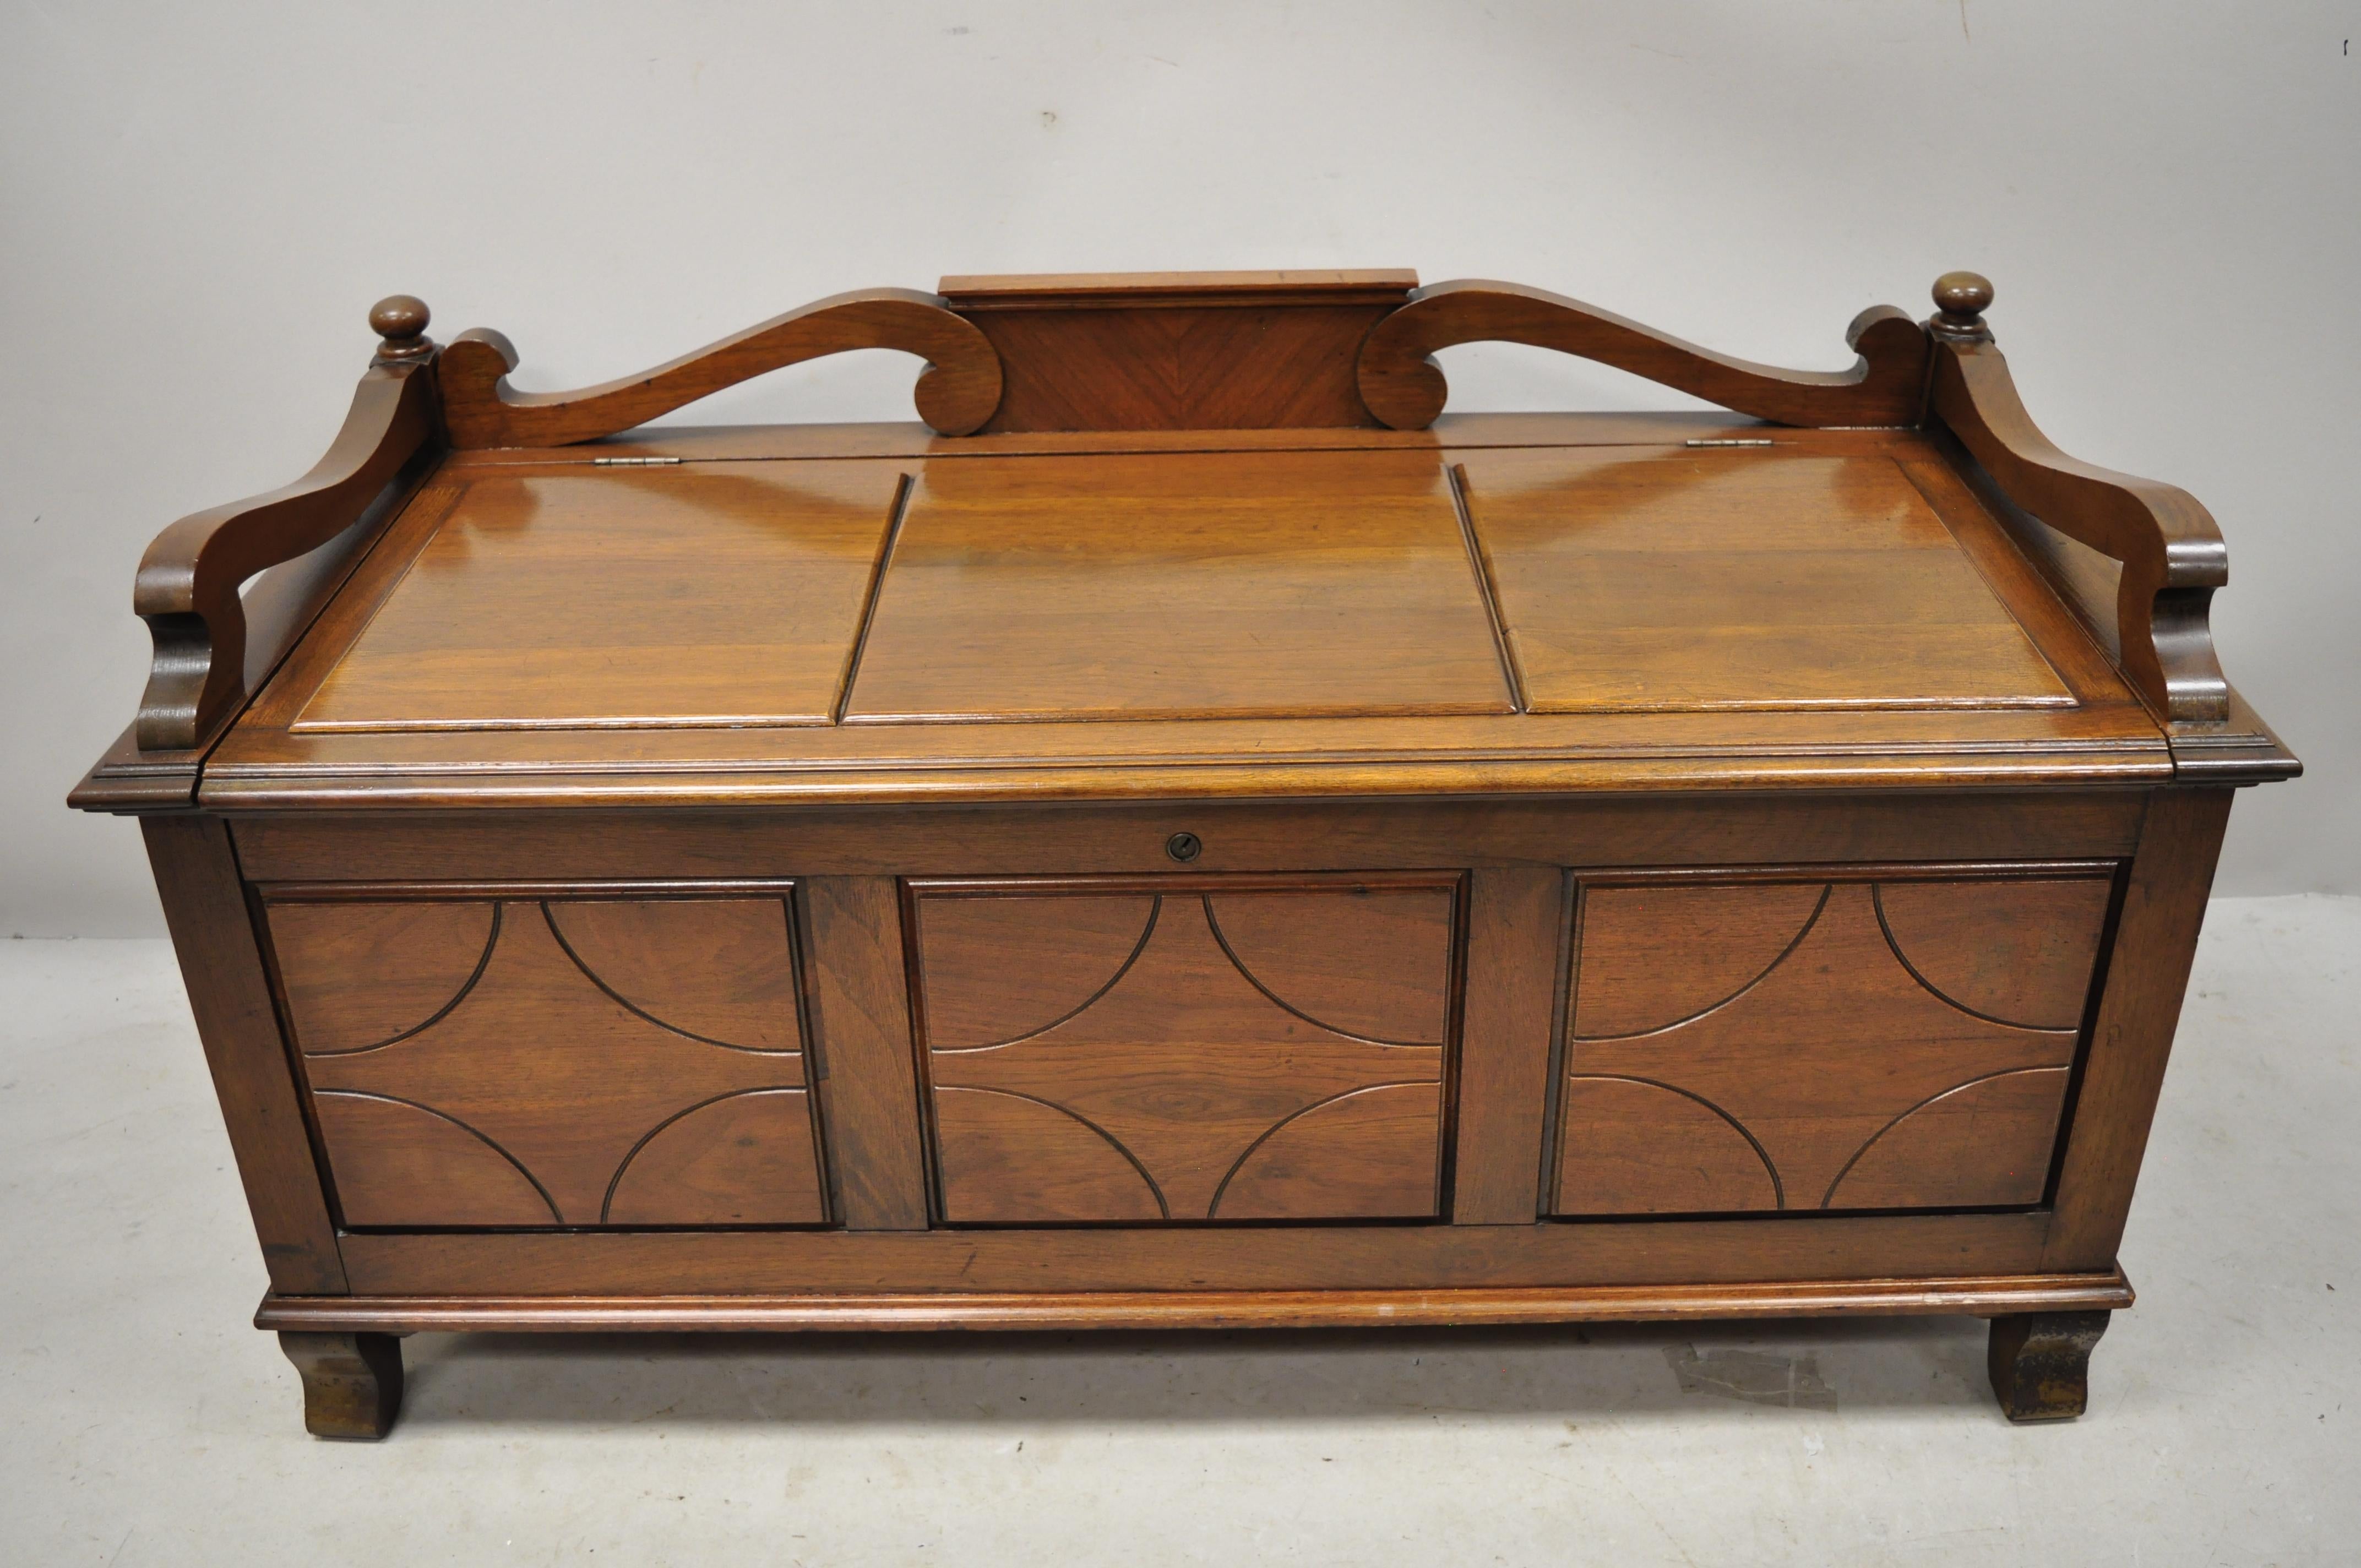 Antique Jacobean depression walnut cedar chest blanket chest bench storage trunk. Item features cedar lined interior, raised panel front and sides, bench seat, solid wood construction, beautiful wood grain, nicely carved details, no key, but